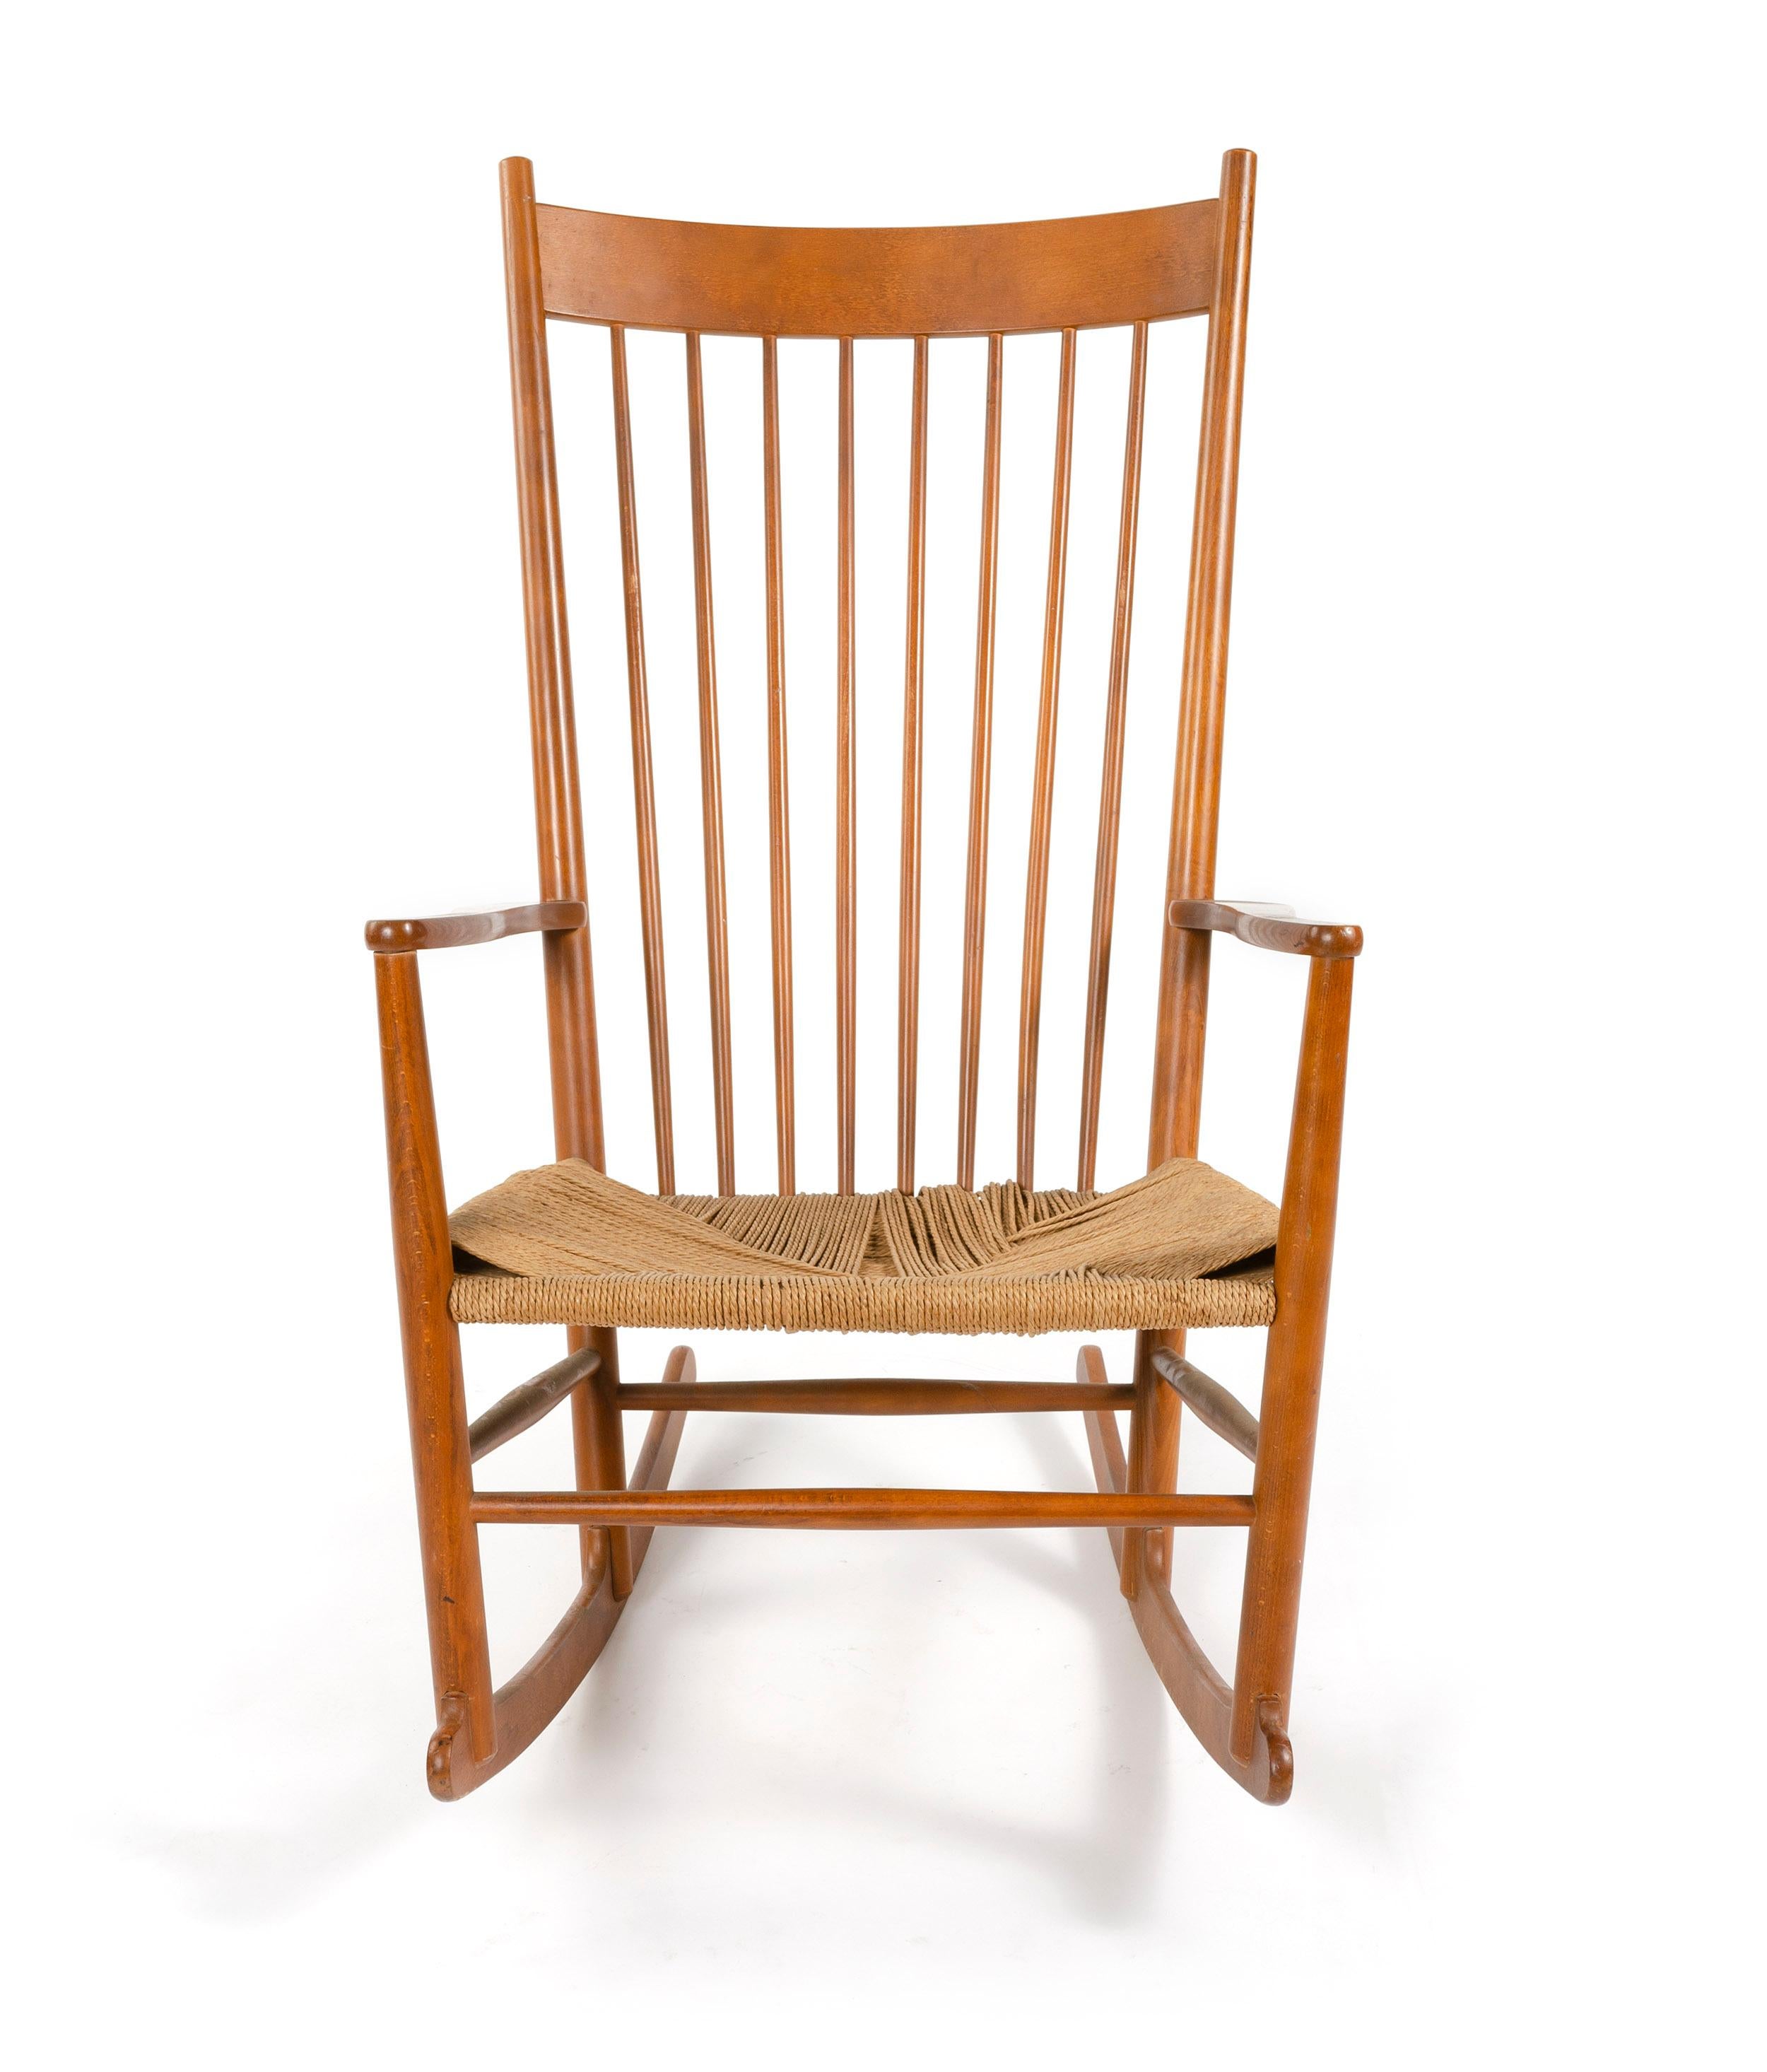 A Shaker Style Scandinavian Modern rocking chair designed by Hans Wegner in beech wood with a woven paper cord seat.
Made in Denmark by FDB, circa 1970s.